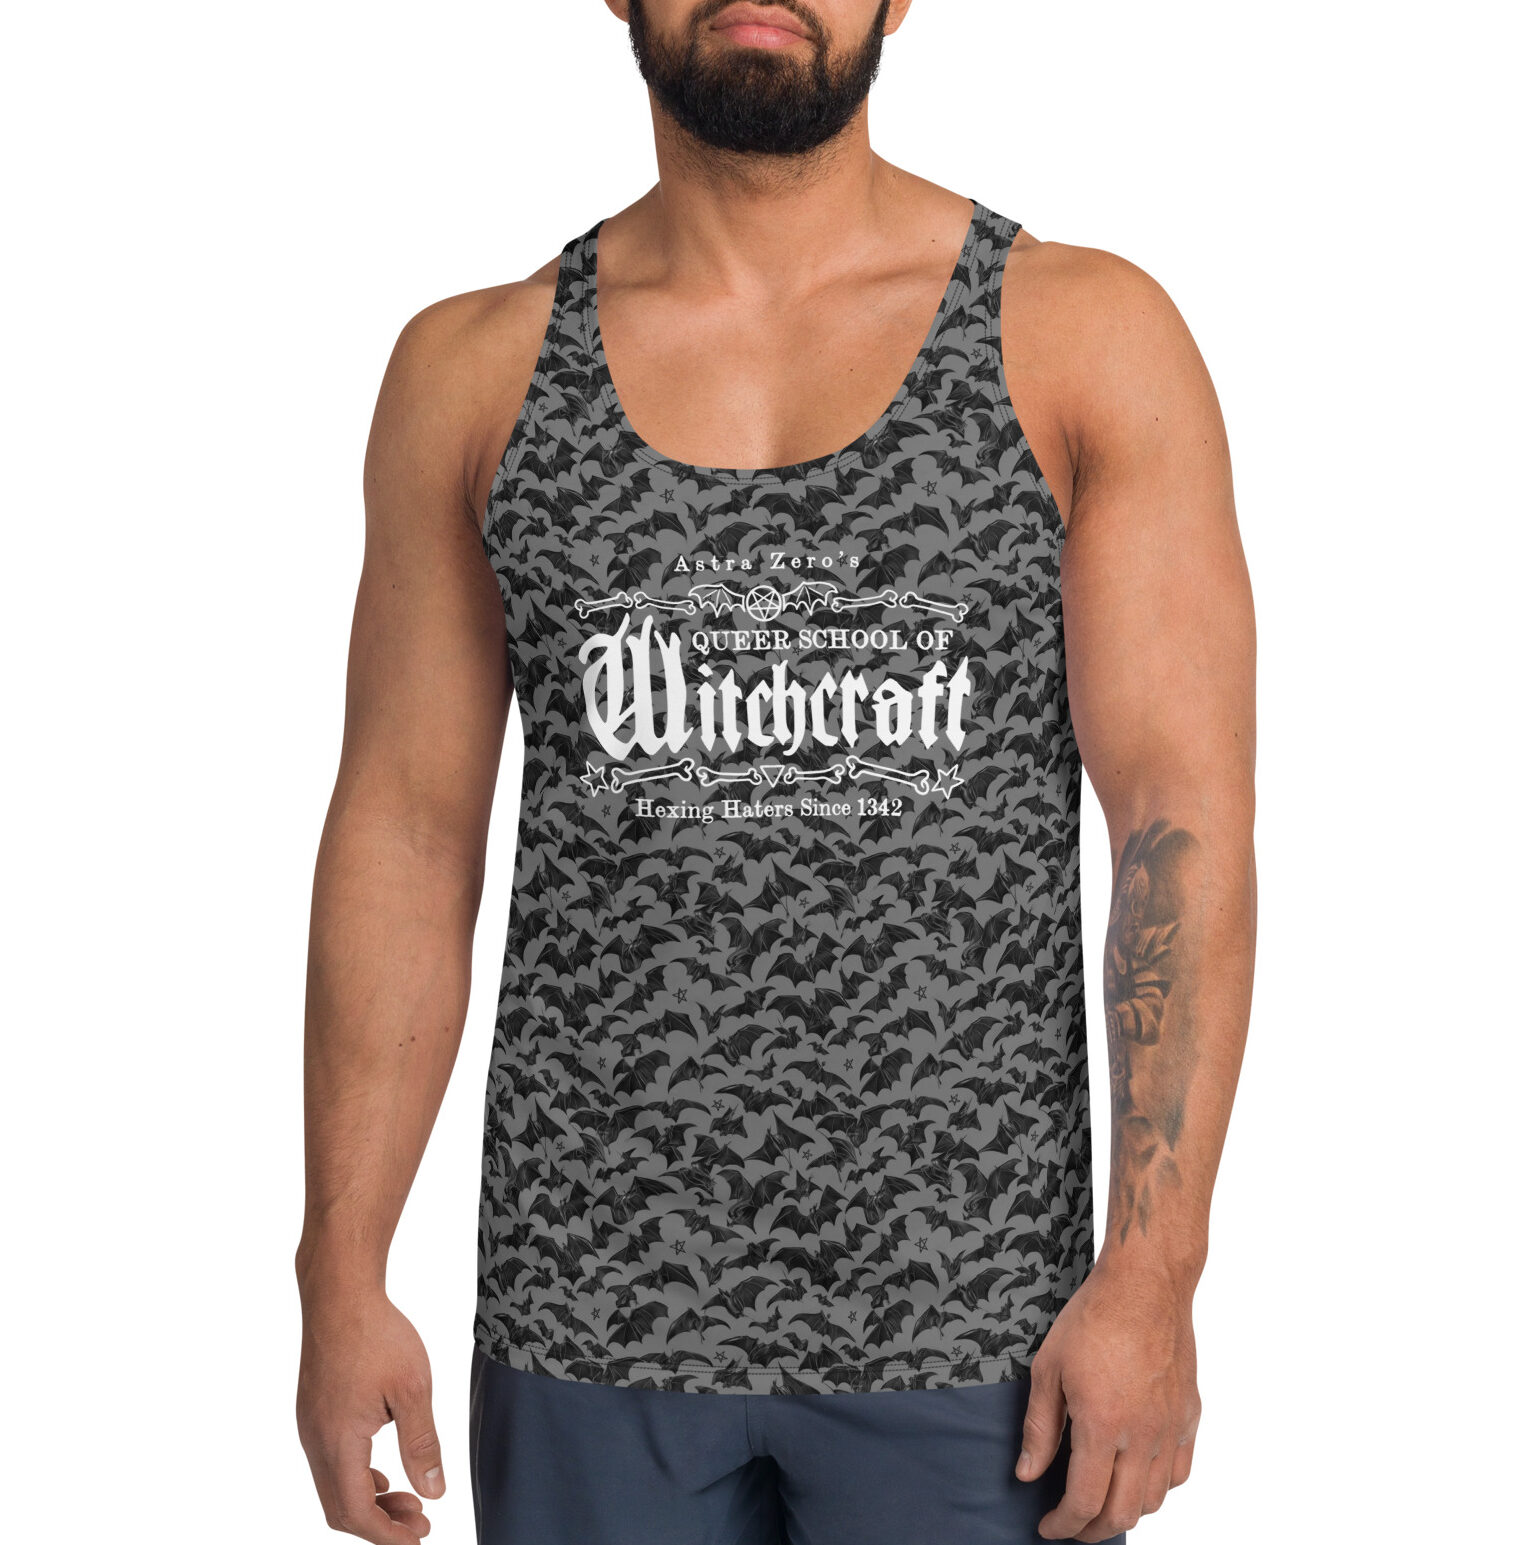 Featured image for “Queer School of Witchcraft Bats - Unisex Tank Top”